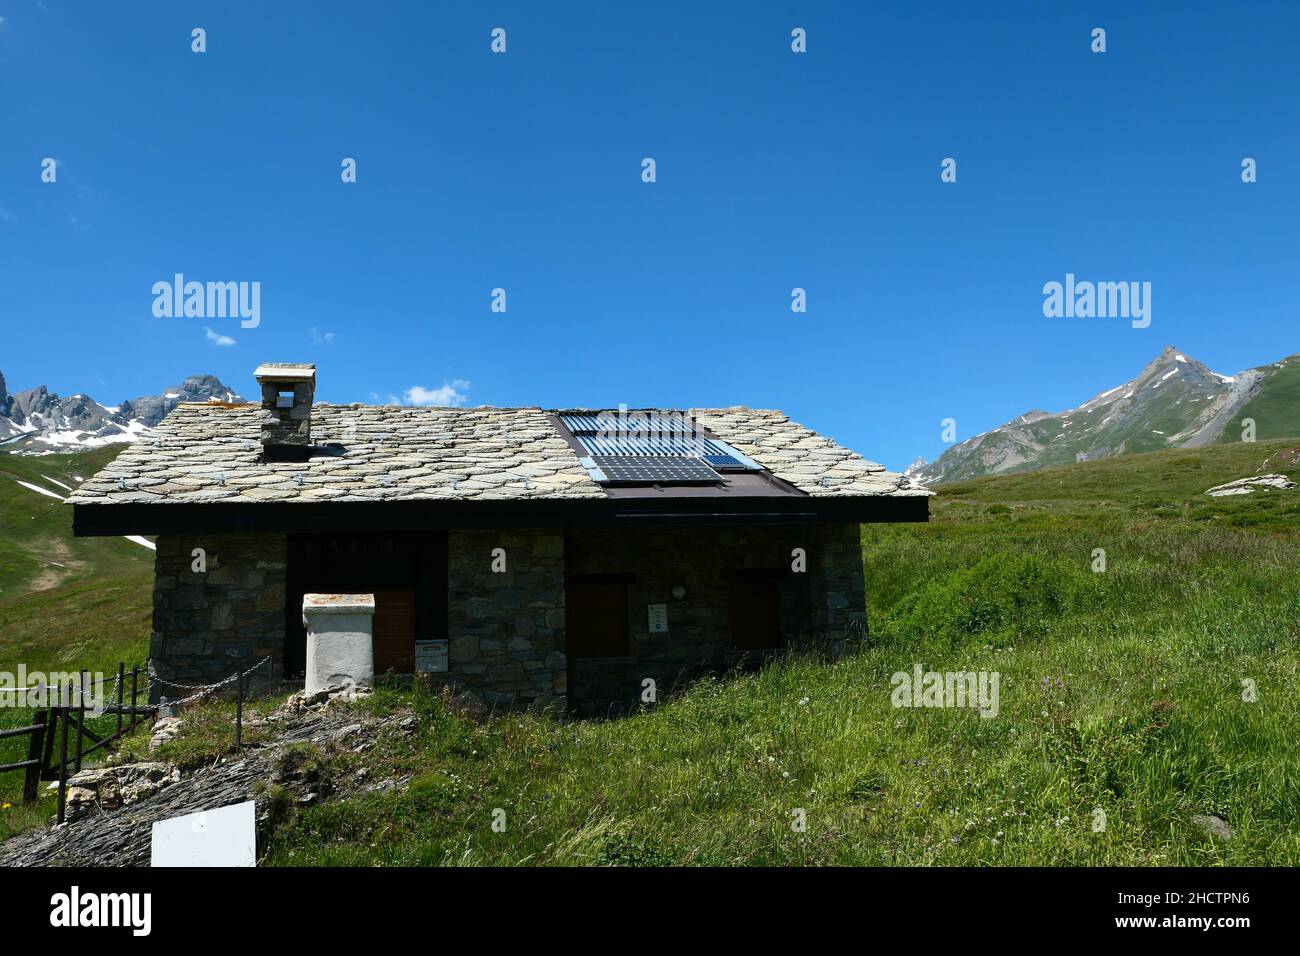 Roof of a house equipped with photovoltaic panels. Dwelling in nature with the mountain in the background blurred voluntarily. Stock Photo